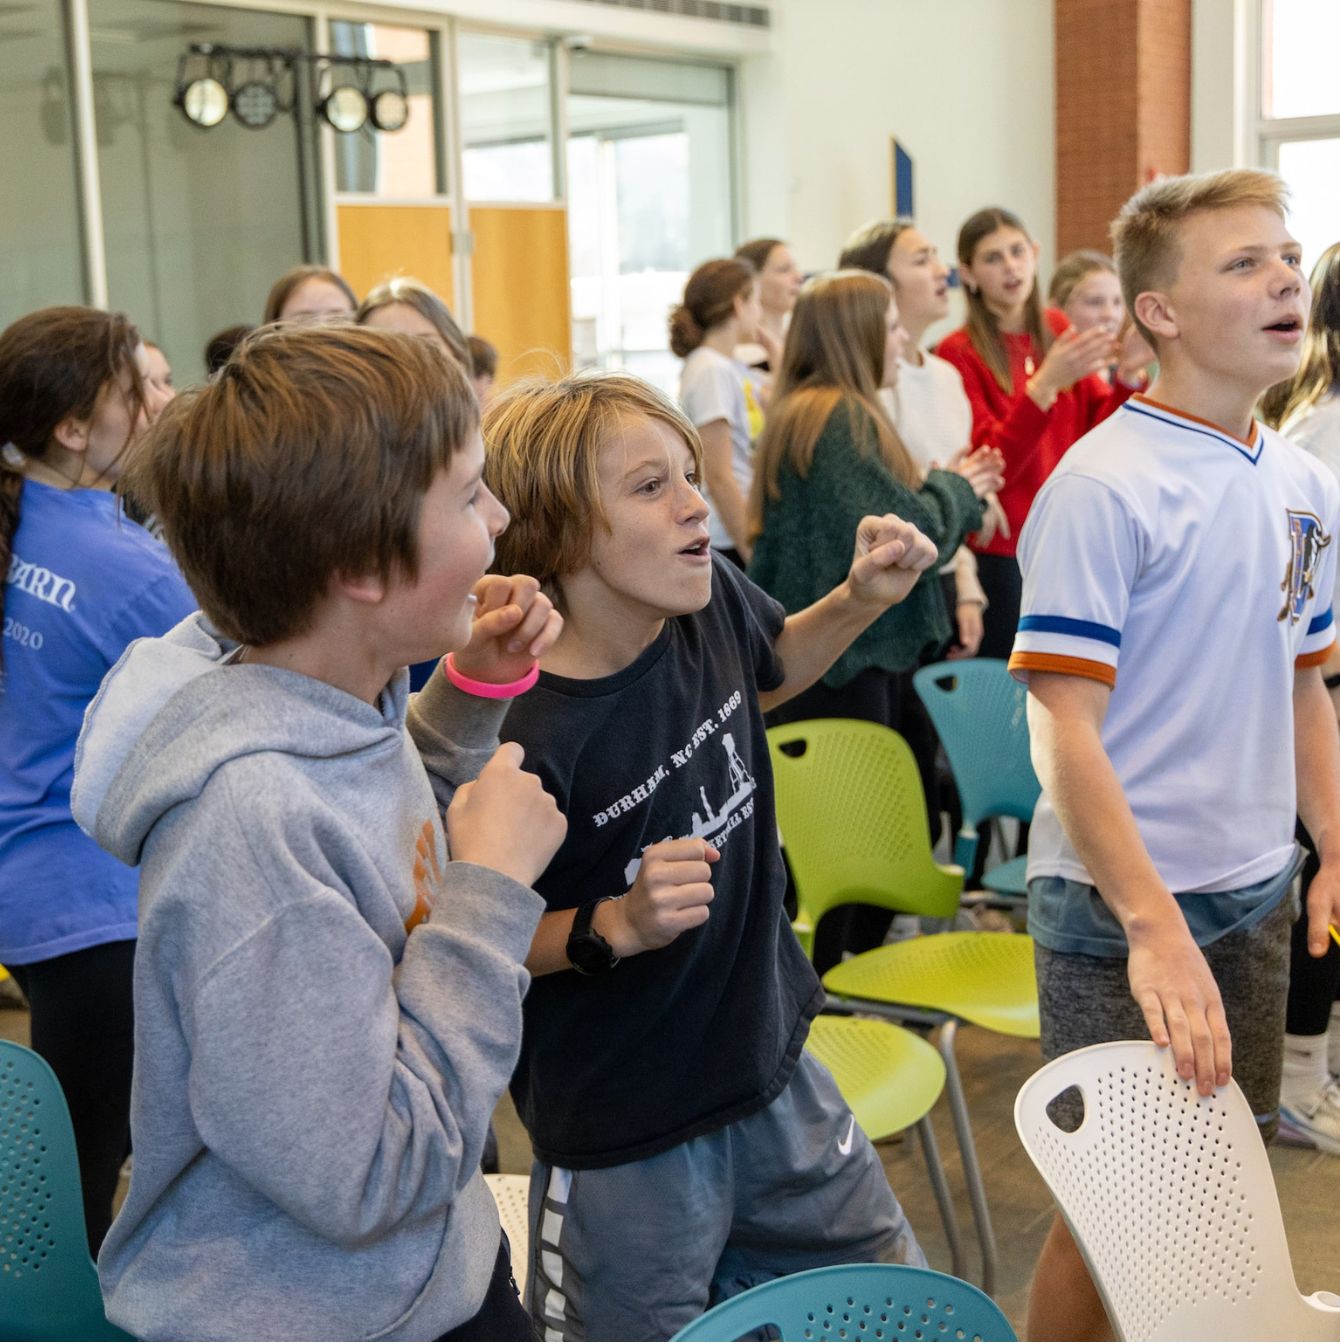 A group of middle school students are caught in a moment of excitement and anticipation at a school event, with expressions of joy and engagement on their faces.